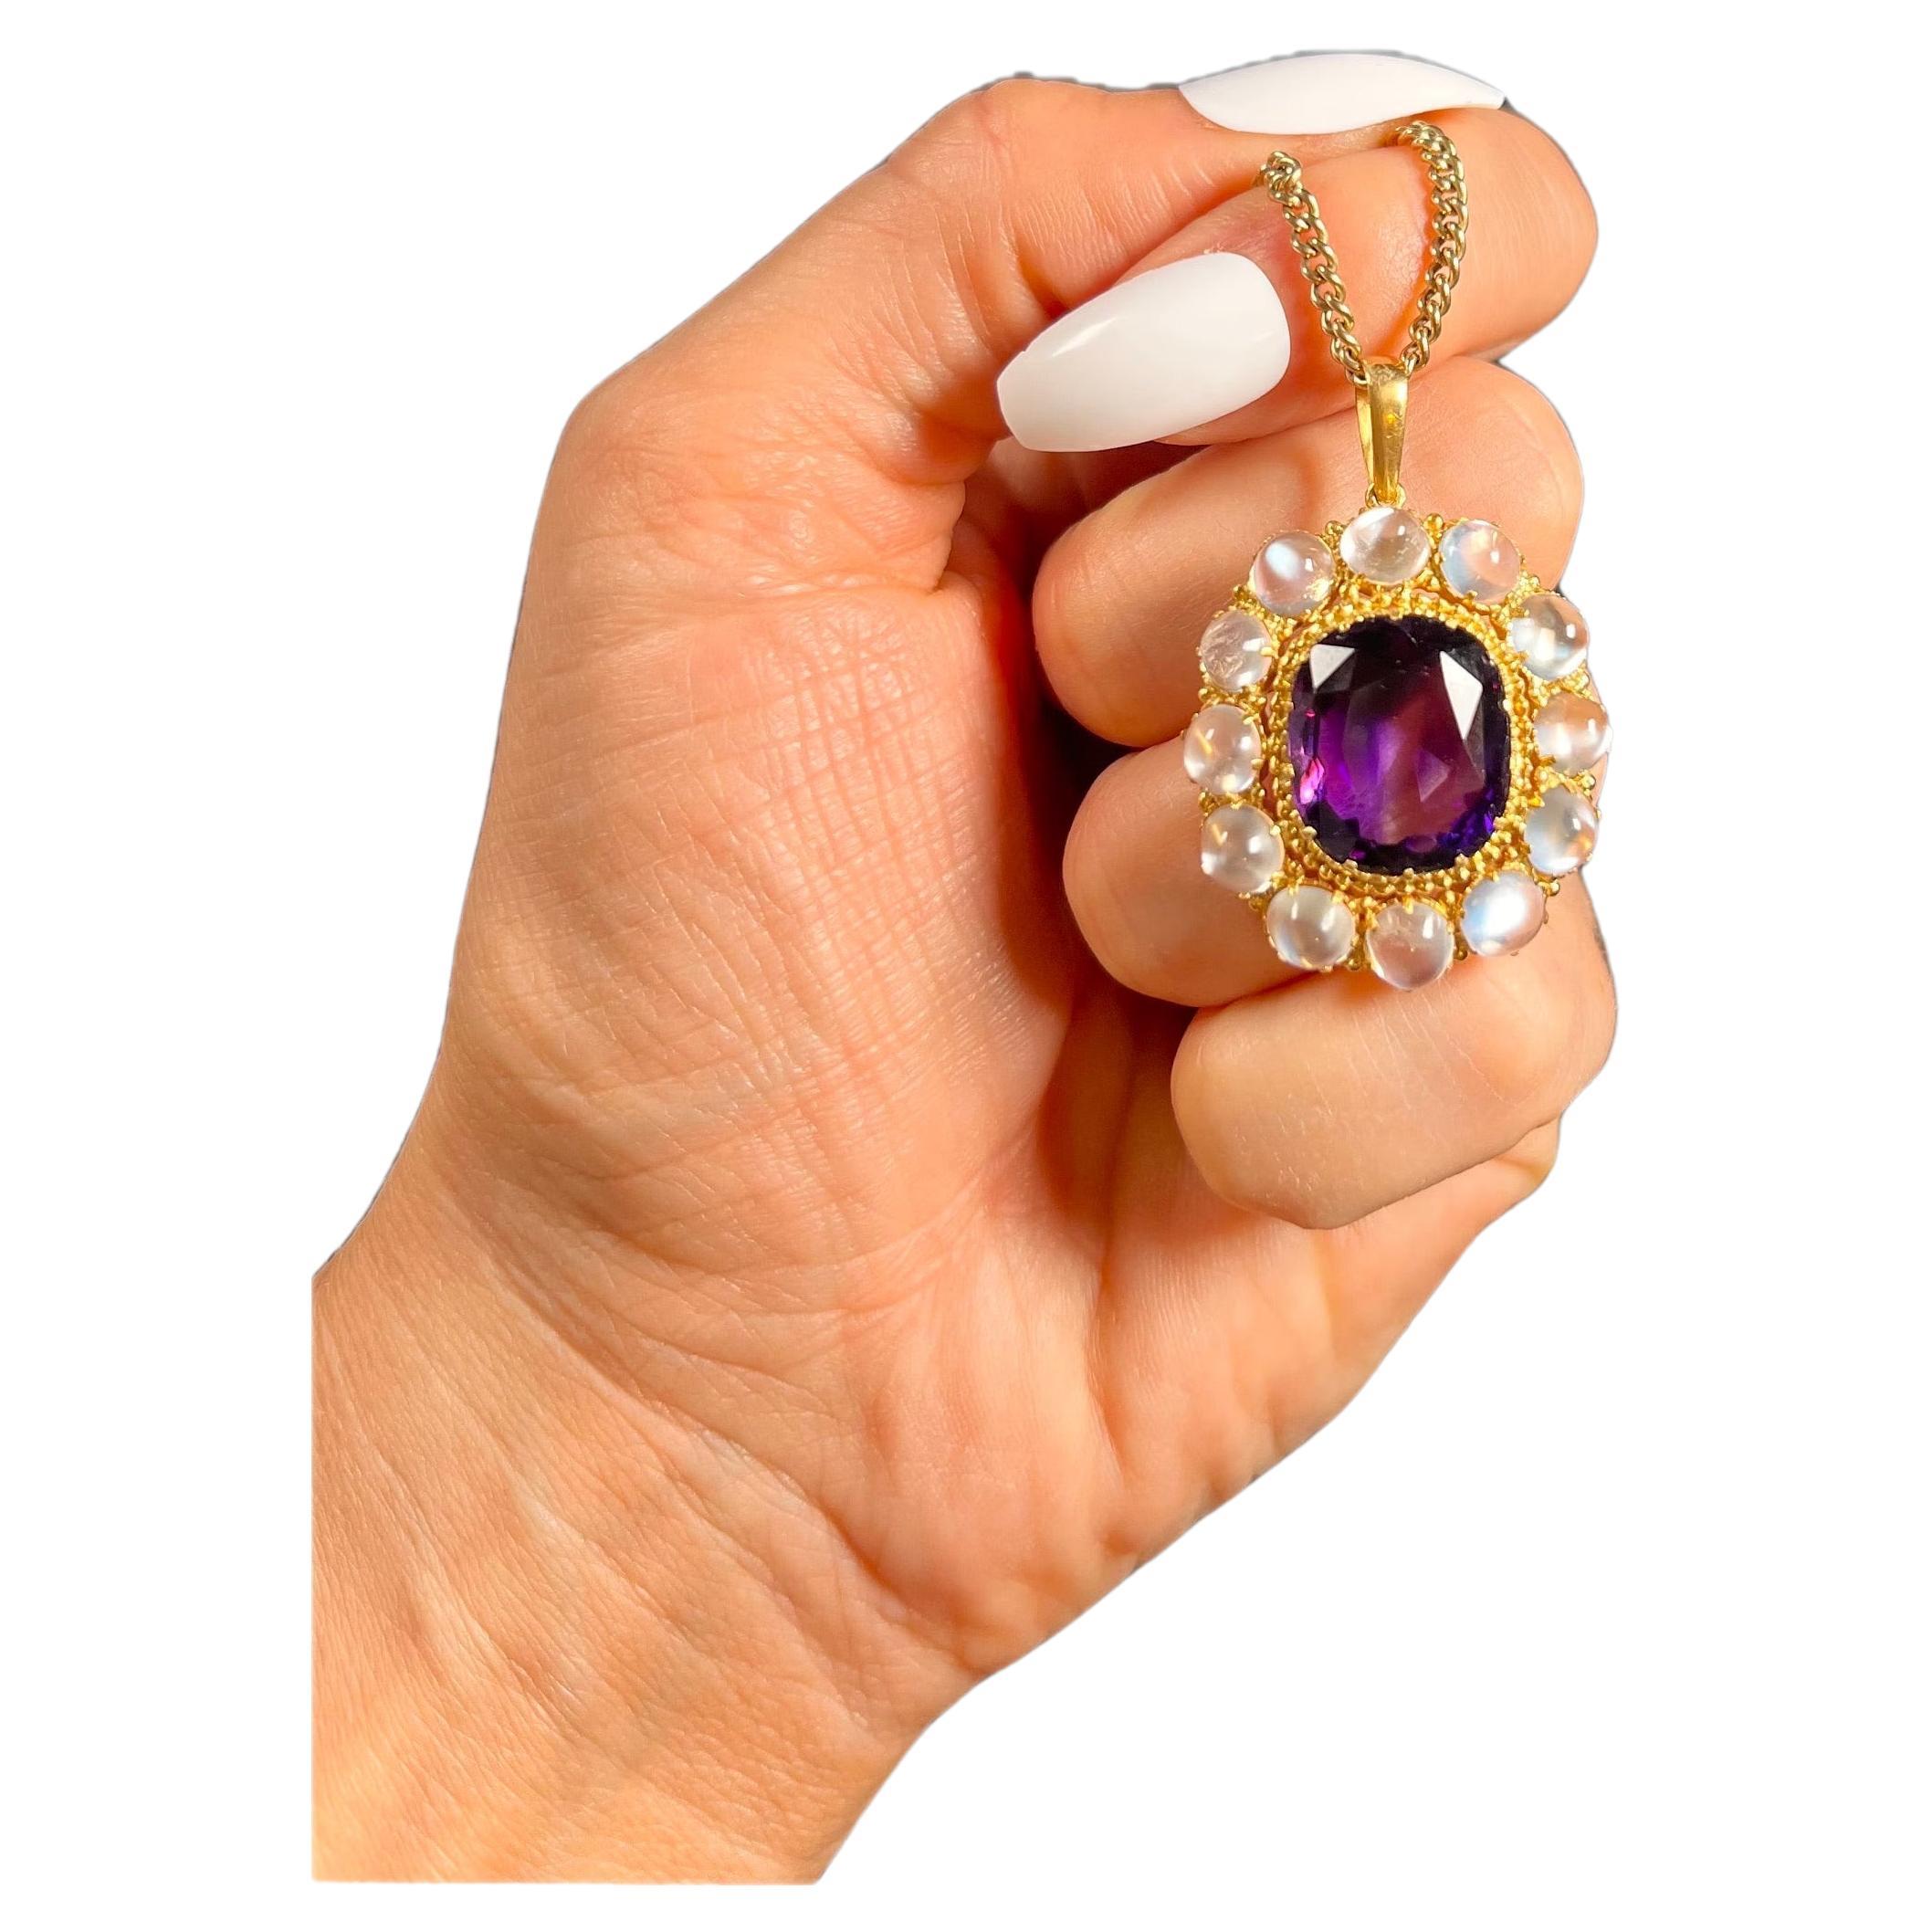 Antique 15t Yellow Gold Victorian Amethyst & Moonstone Pendant For Sale